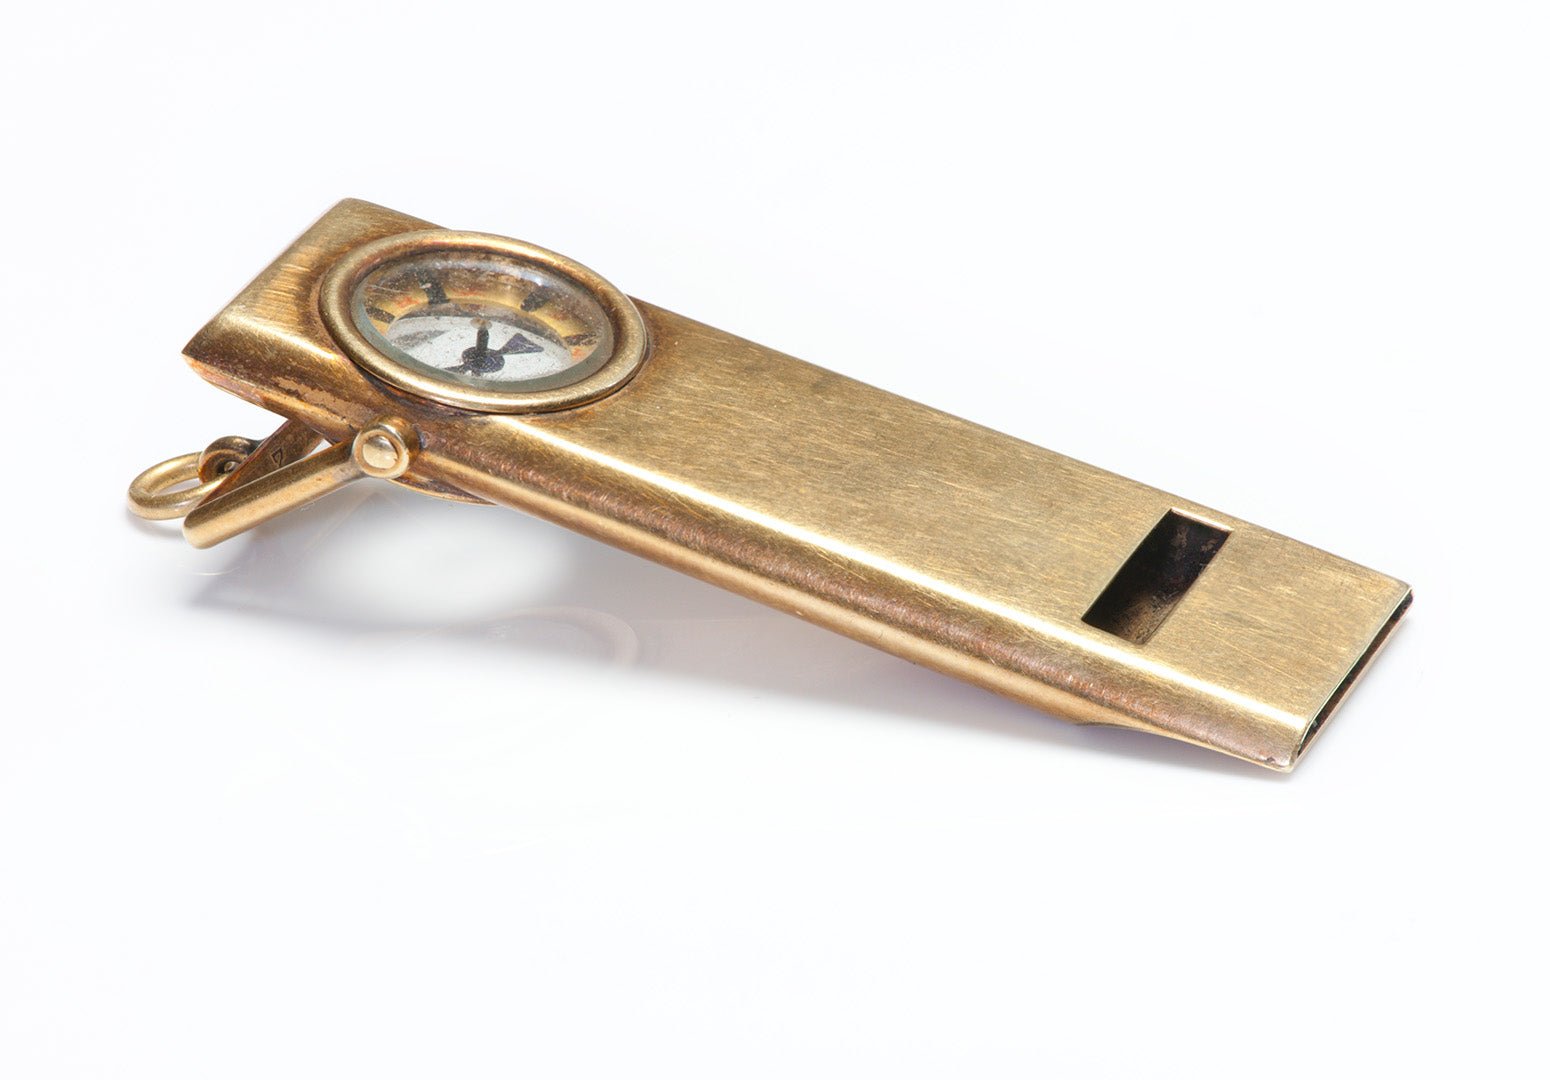 Antique Gold Whistle with Compass Pendant Fob